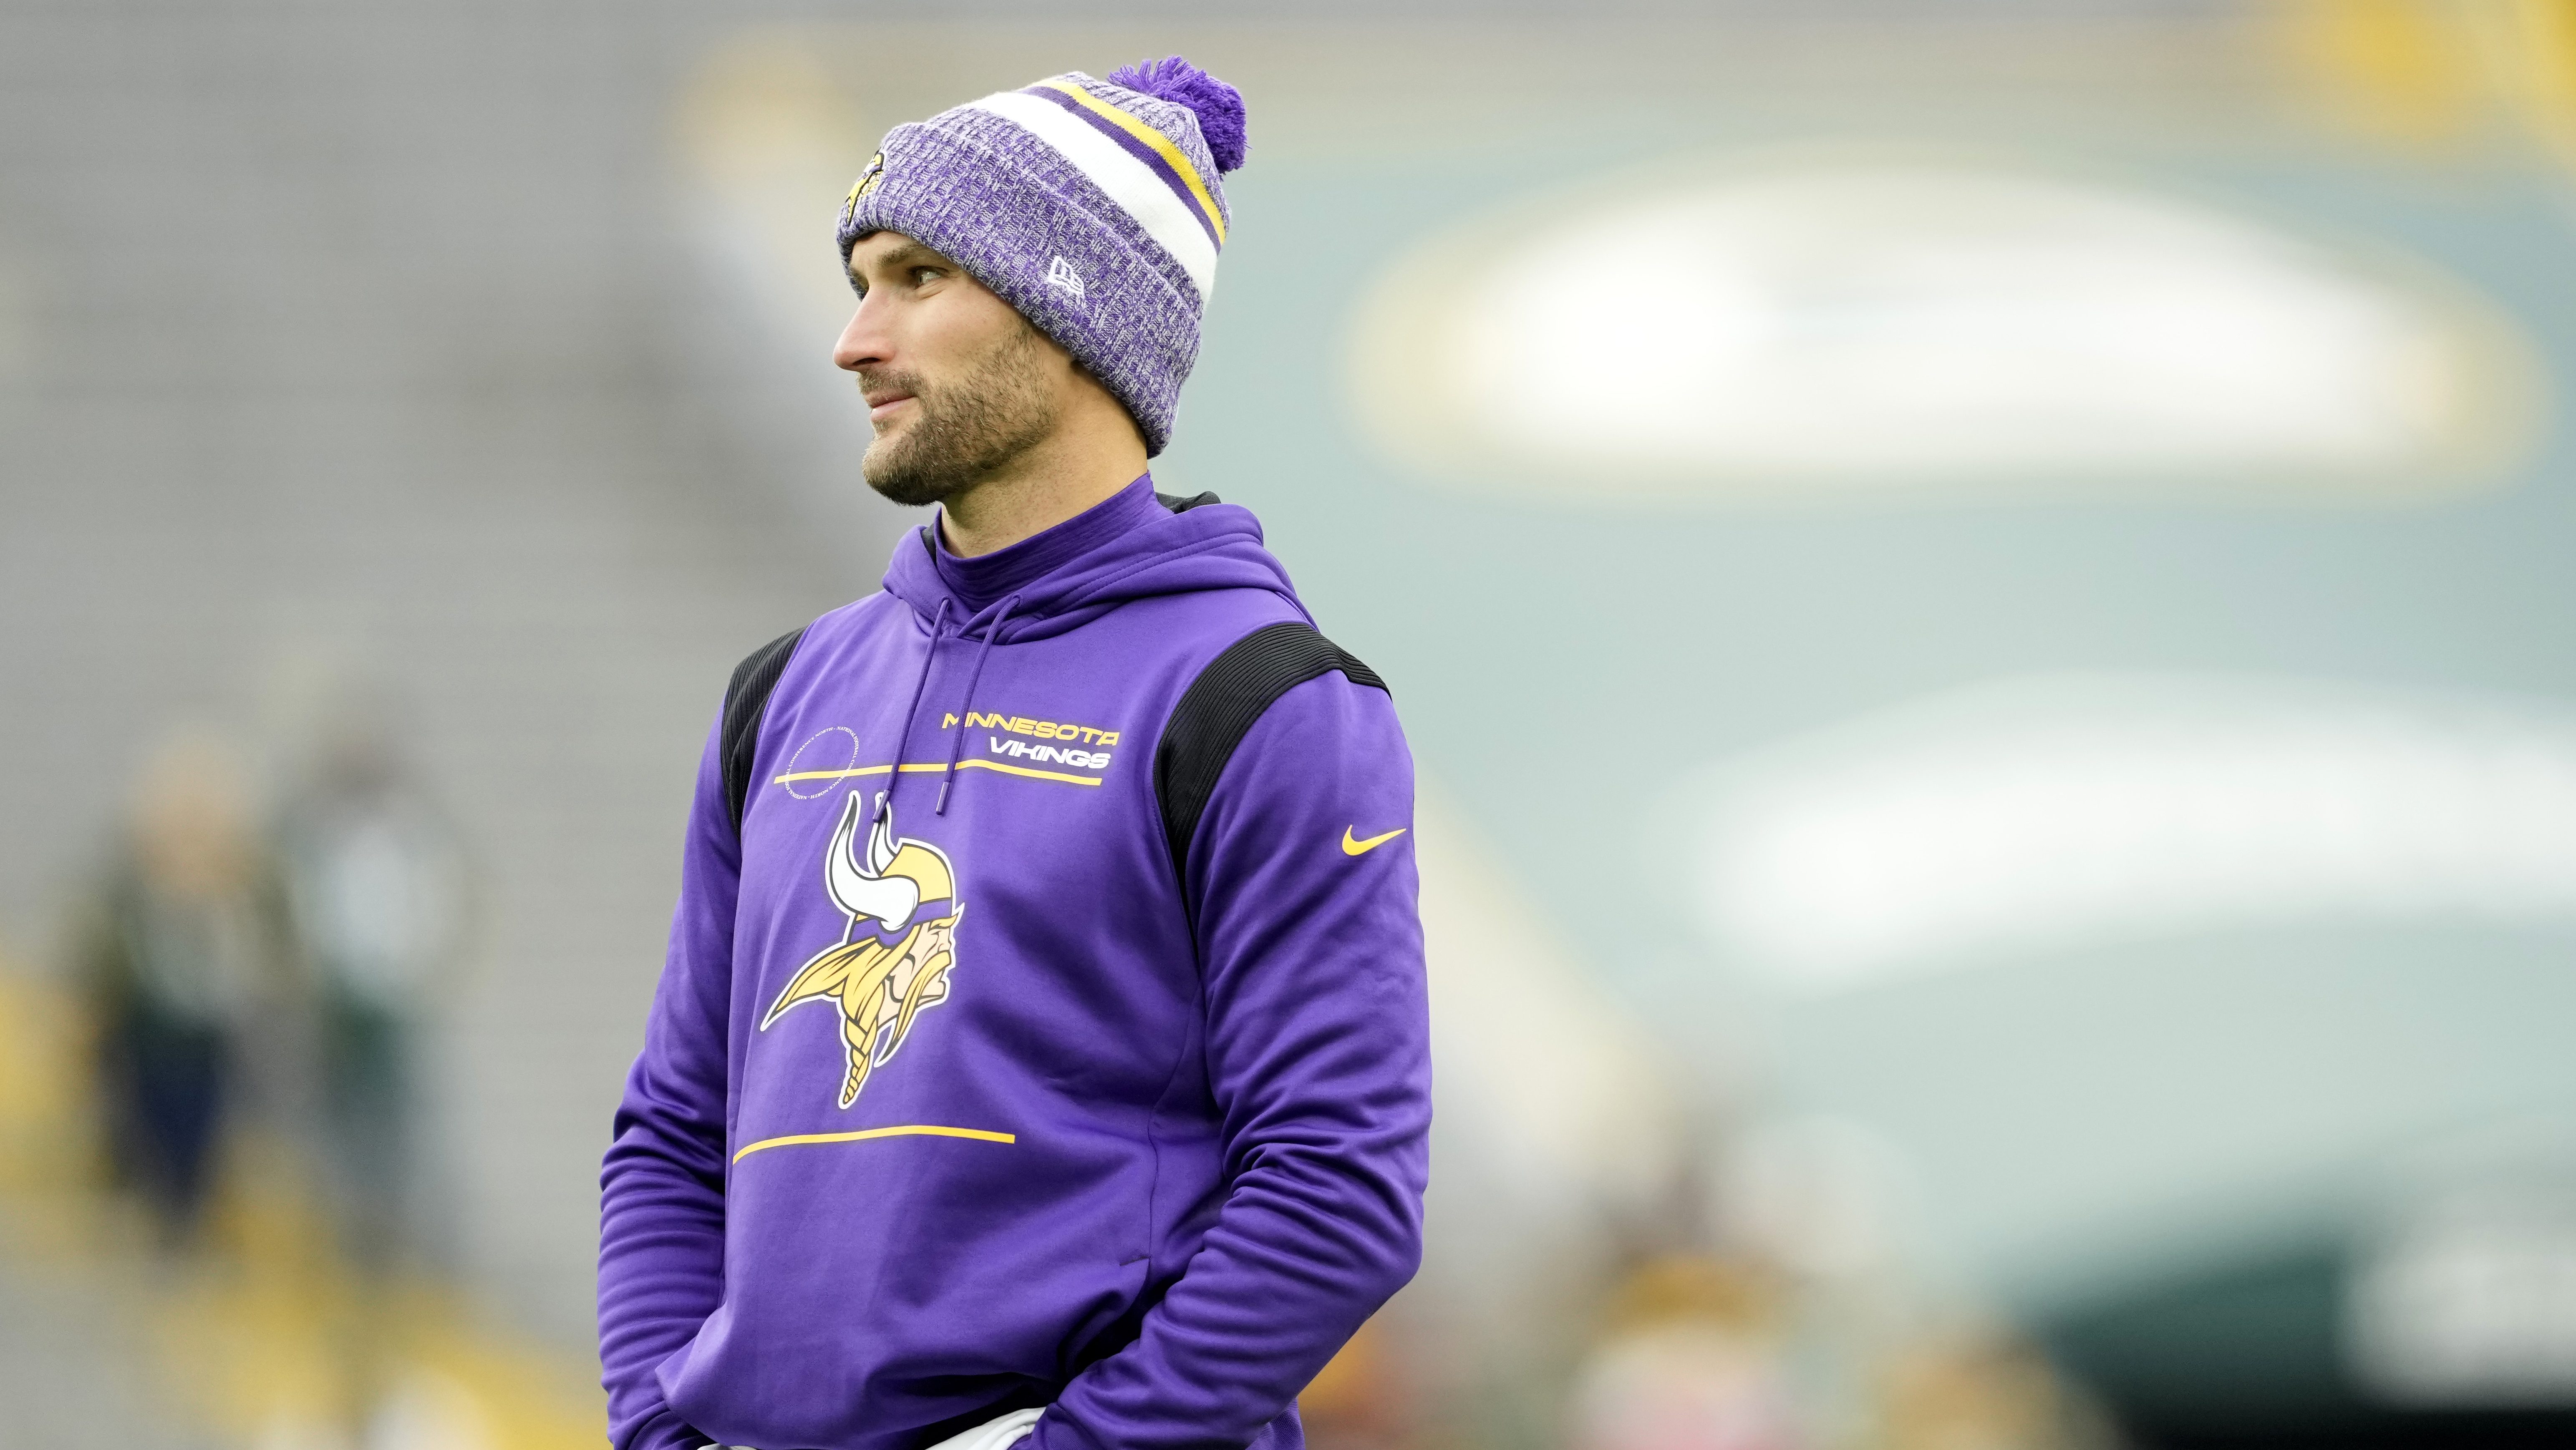 Vikings Predicted to Make Move on Kirk Cousins After Dobbs Win